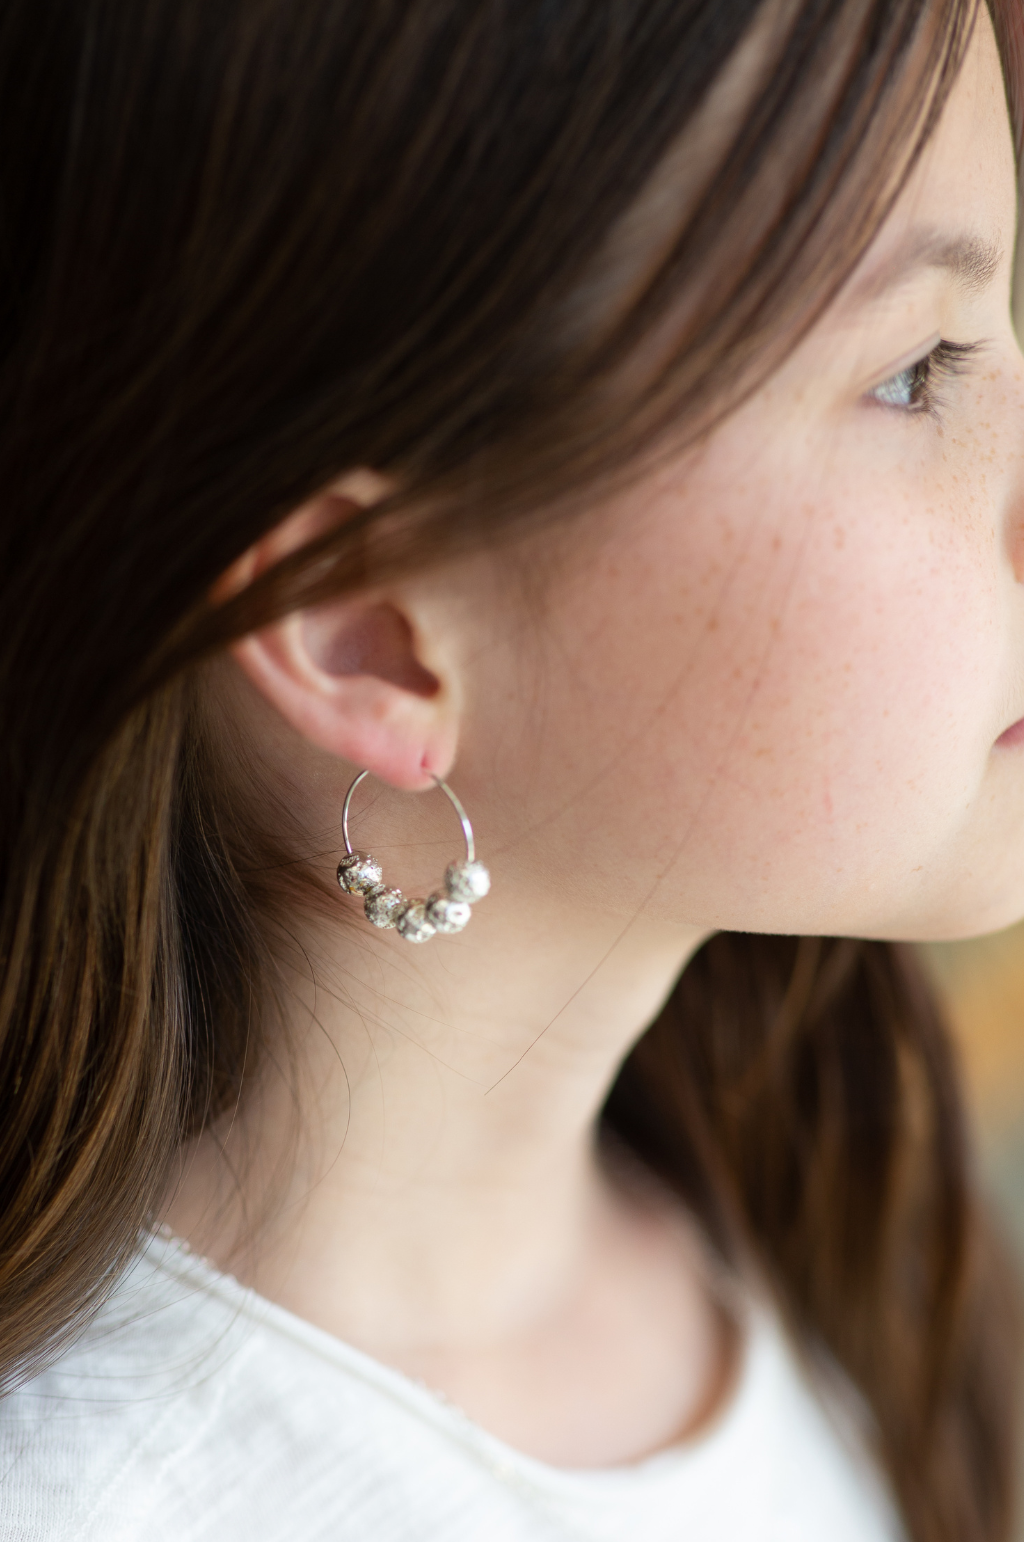 The Callisto 'Gracie' Earrings by Annie Claire Designs - SoSis